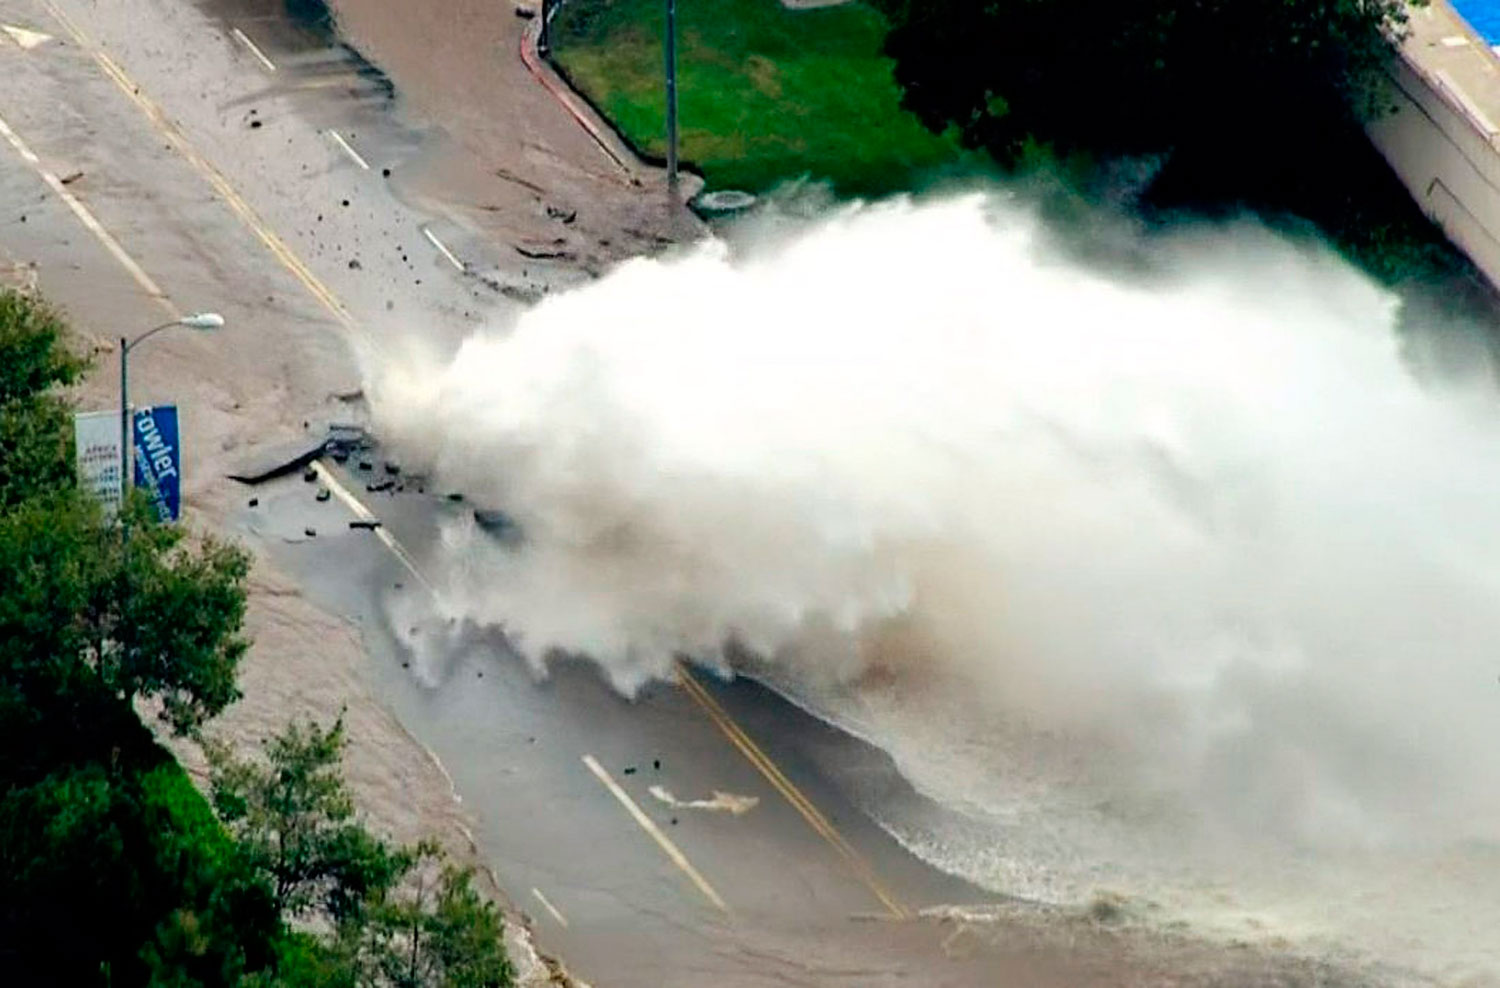 Water gushes from a broken water main on Sunset Boulevard on the UCLA campus in Los Angeles